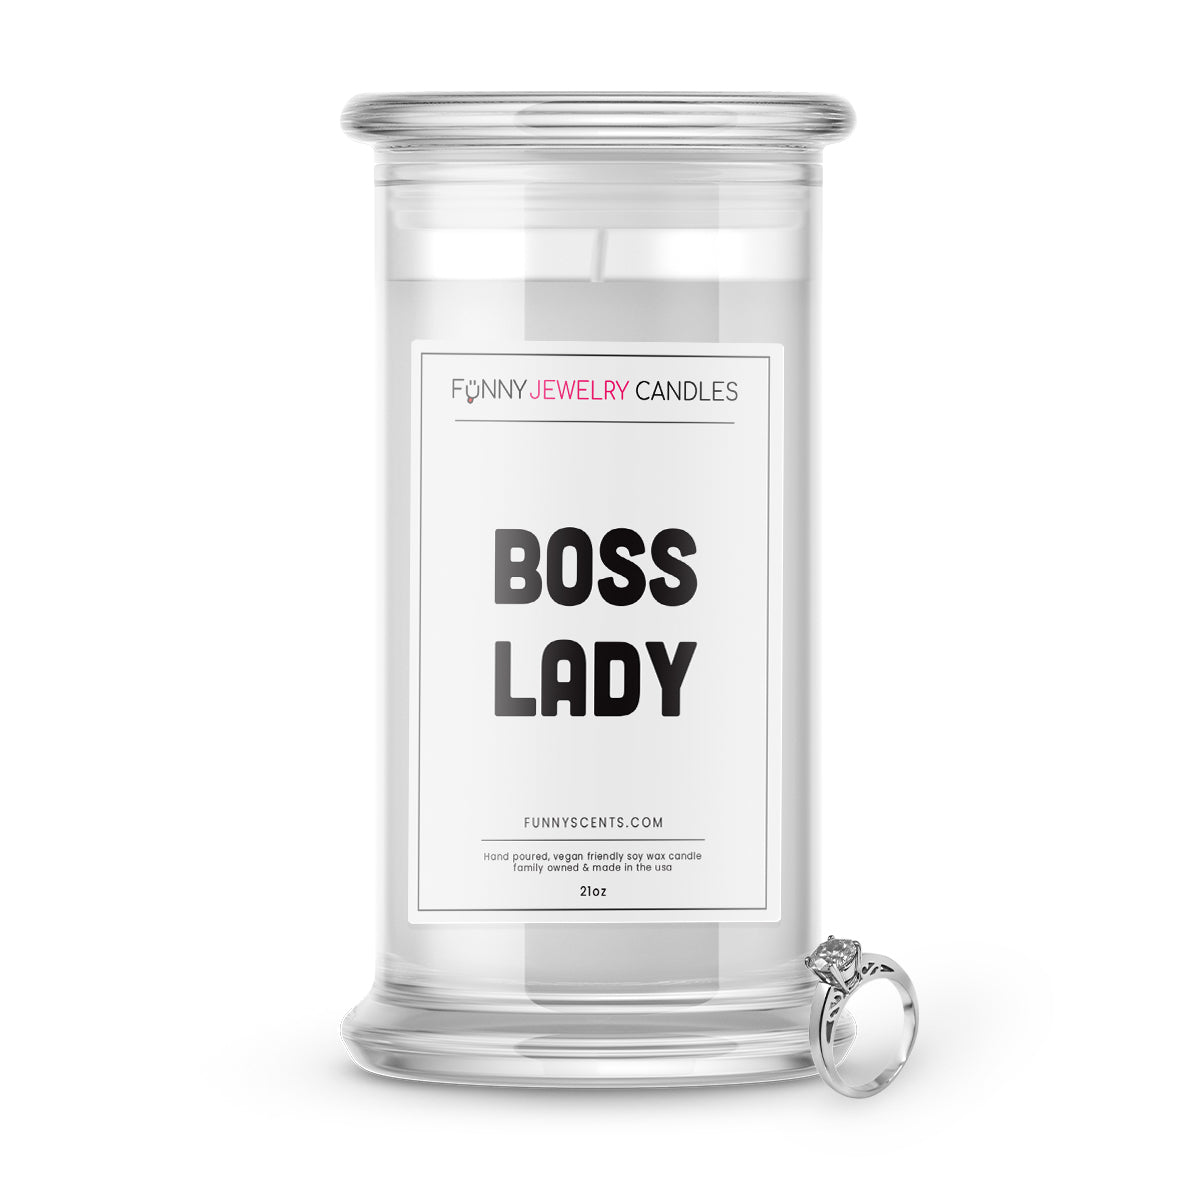 Boss Lady Jewelry Funny Candles